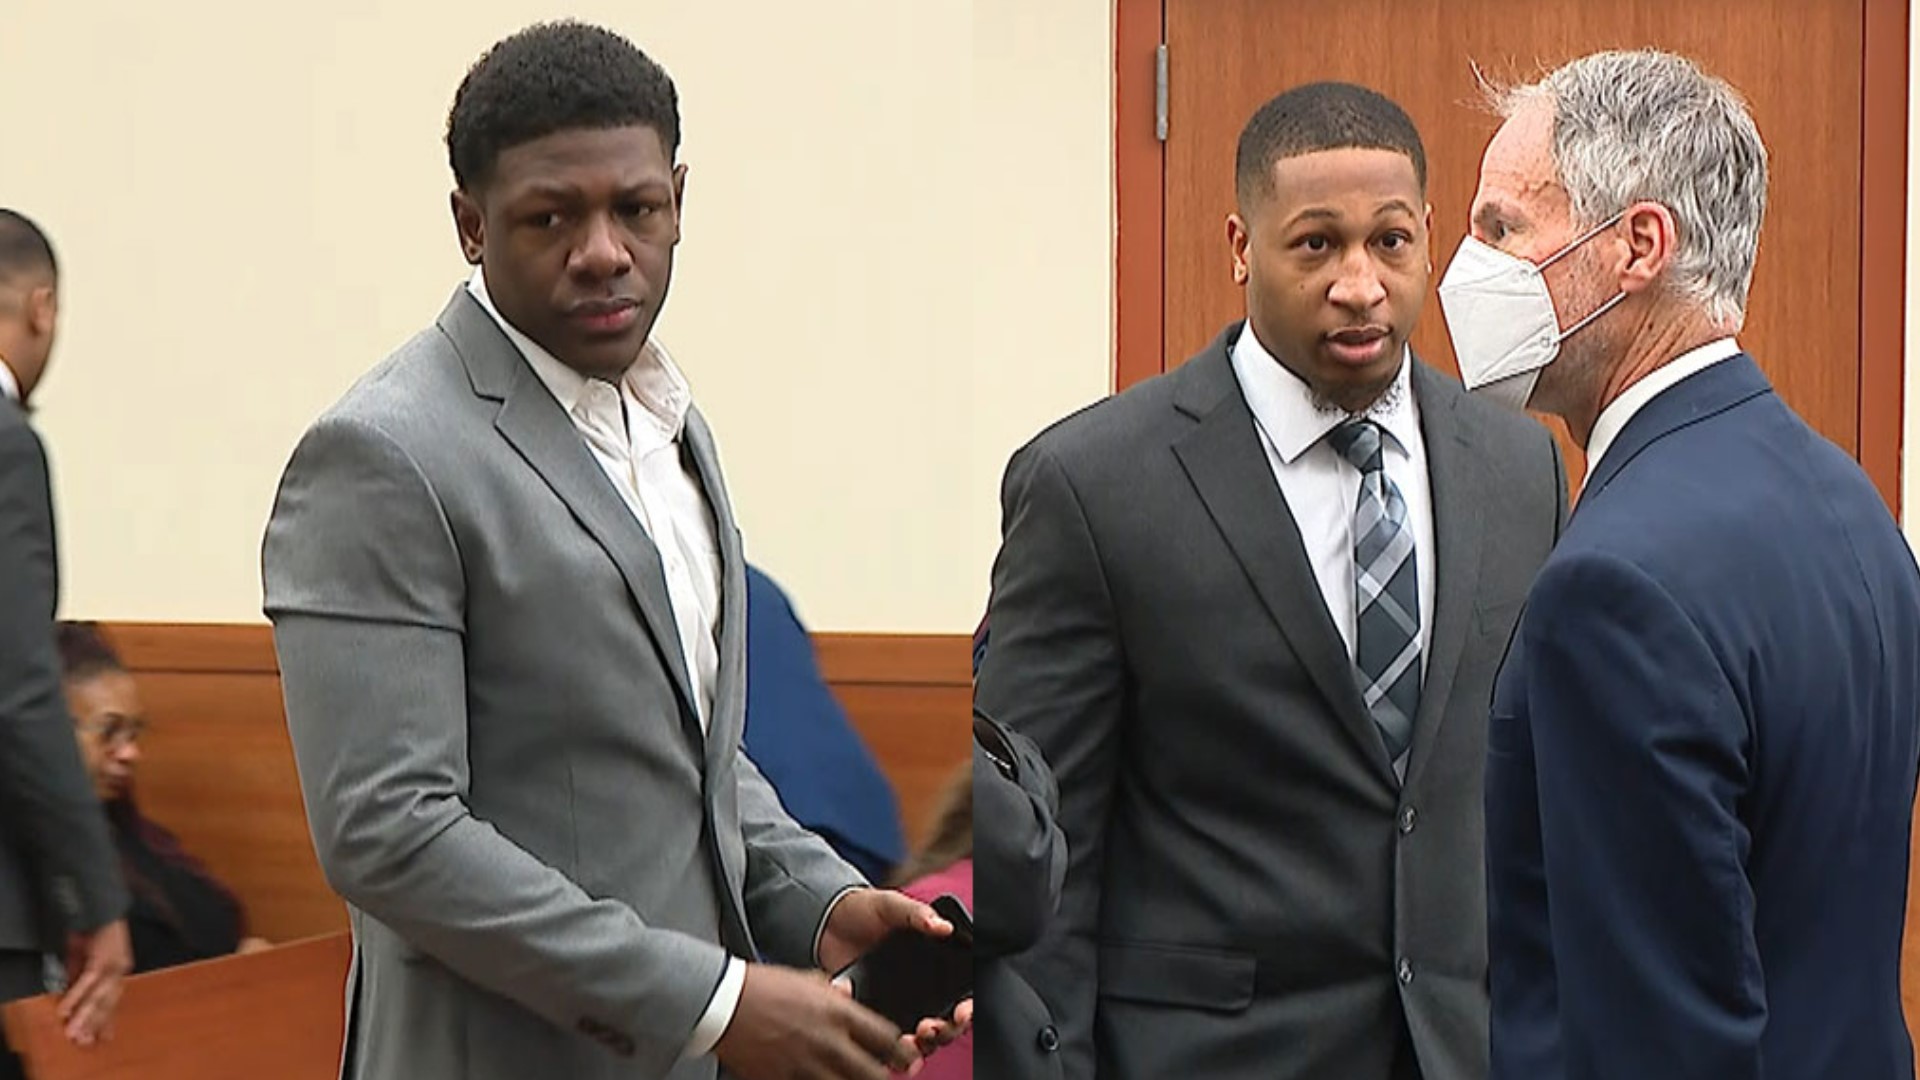 Kidnapped And Raping Hot Aex Free Video - Fomer Ohio State Football players found not guilty | 10tv.com